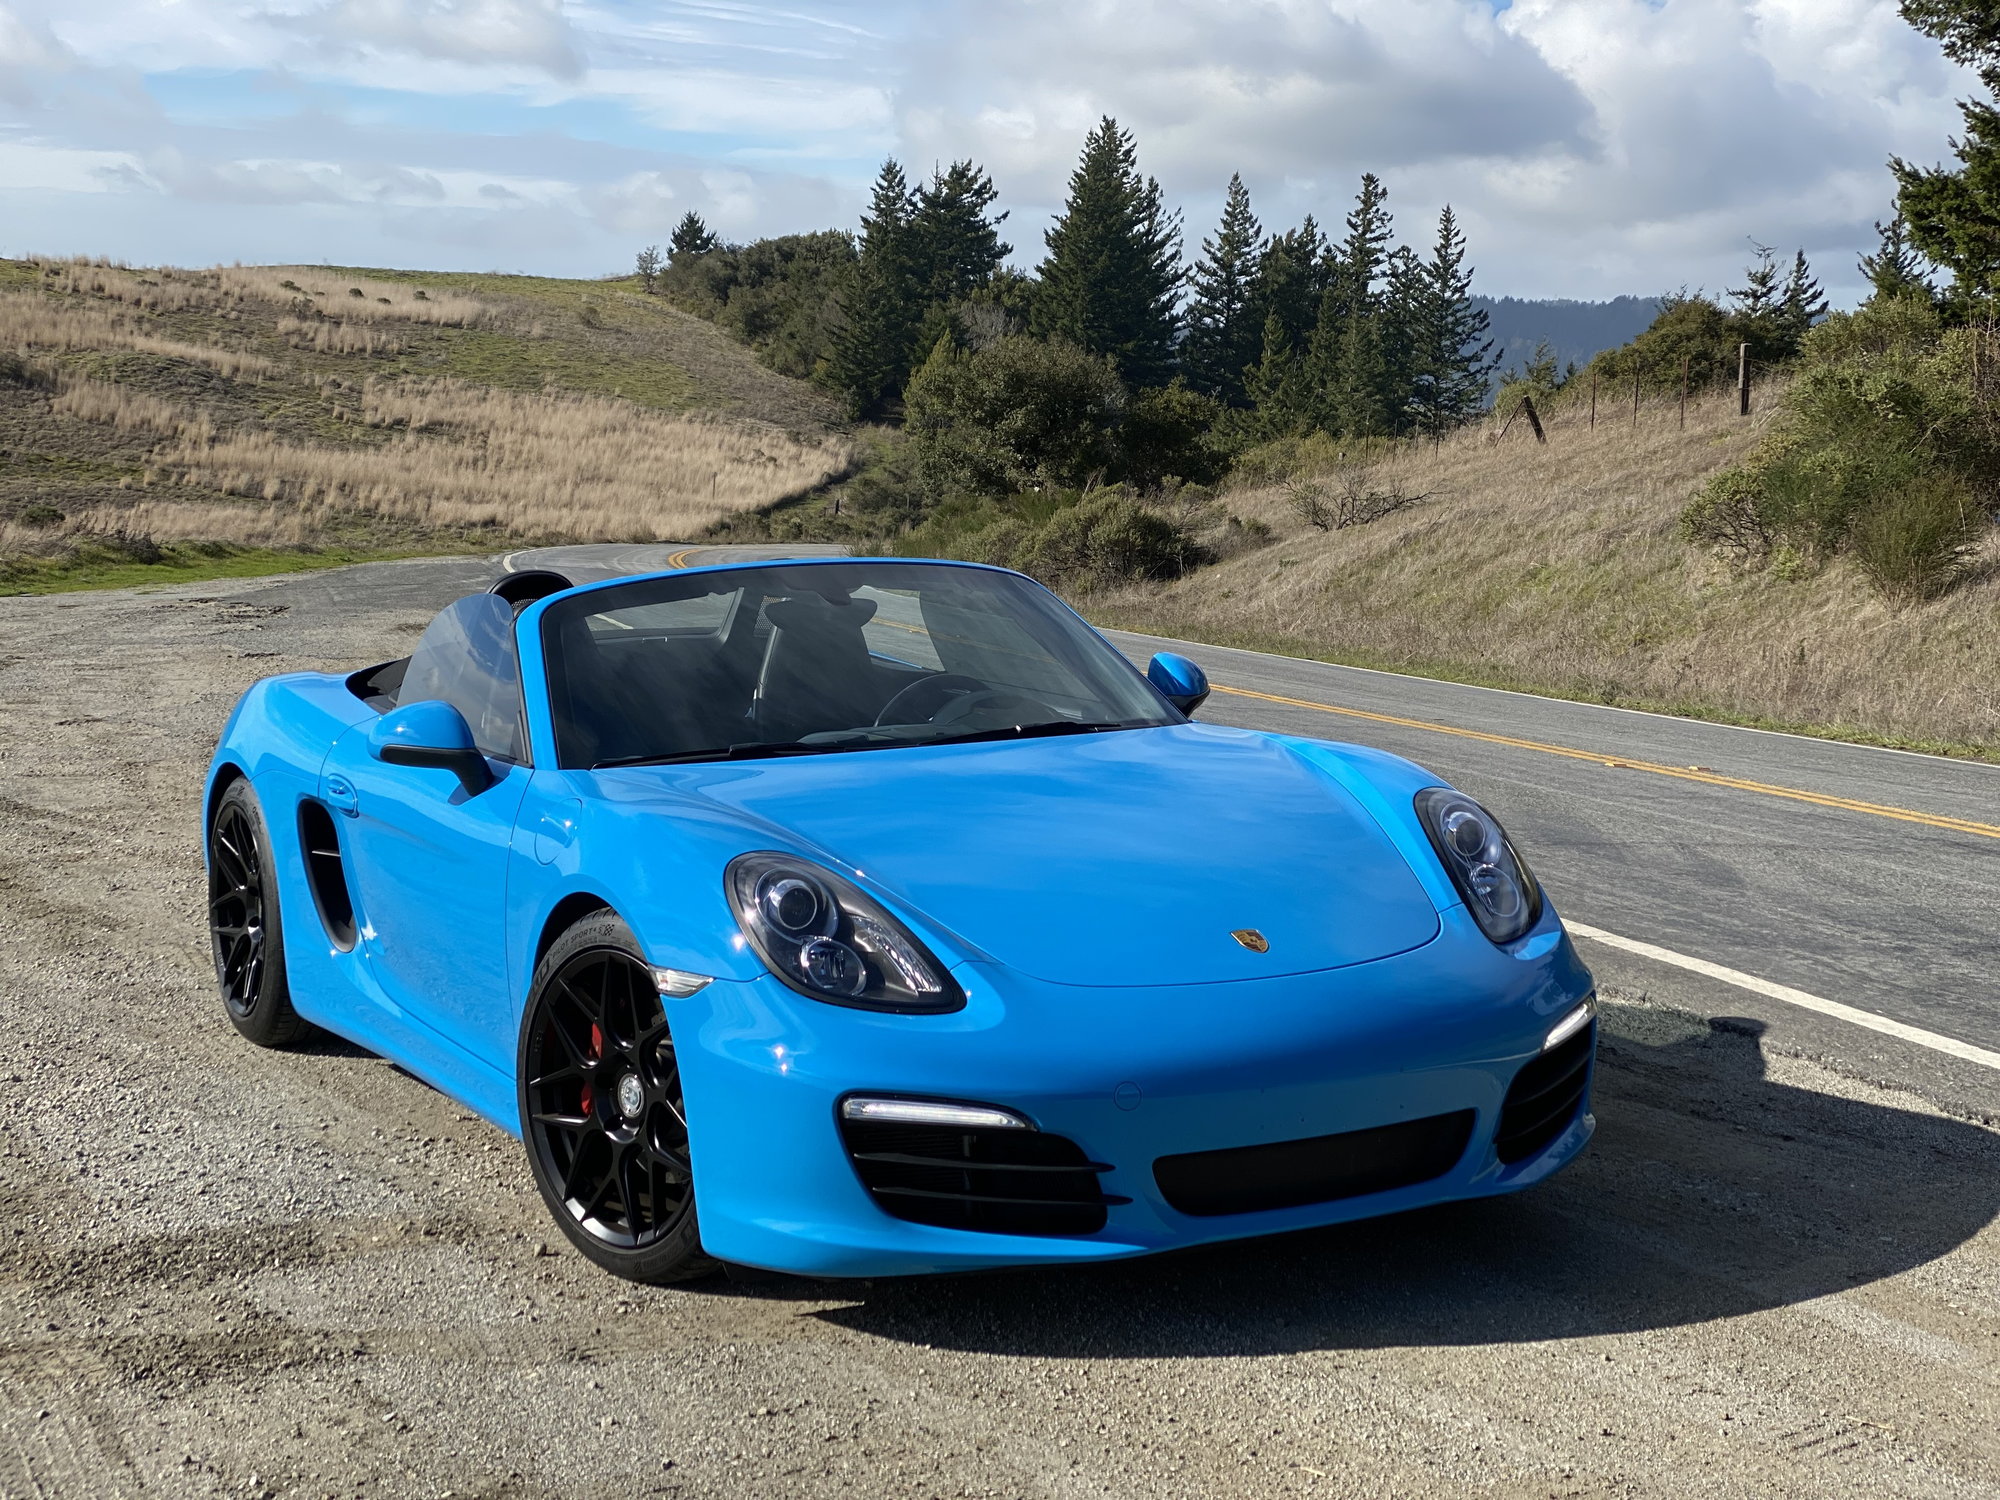 2013 Porsche Boxster - 2013 Porsche Boxster S // PTS Mexico Blue // X73 // 6 SP Manual - Used - VIN WP0CB2A87DS133811 - 26,100 Miles - 6 cyl - 2WD - Manual - Convertible - Blue - South San Francisco, CA 94080, United States